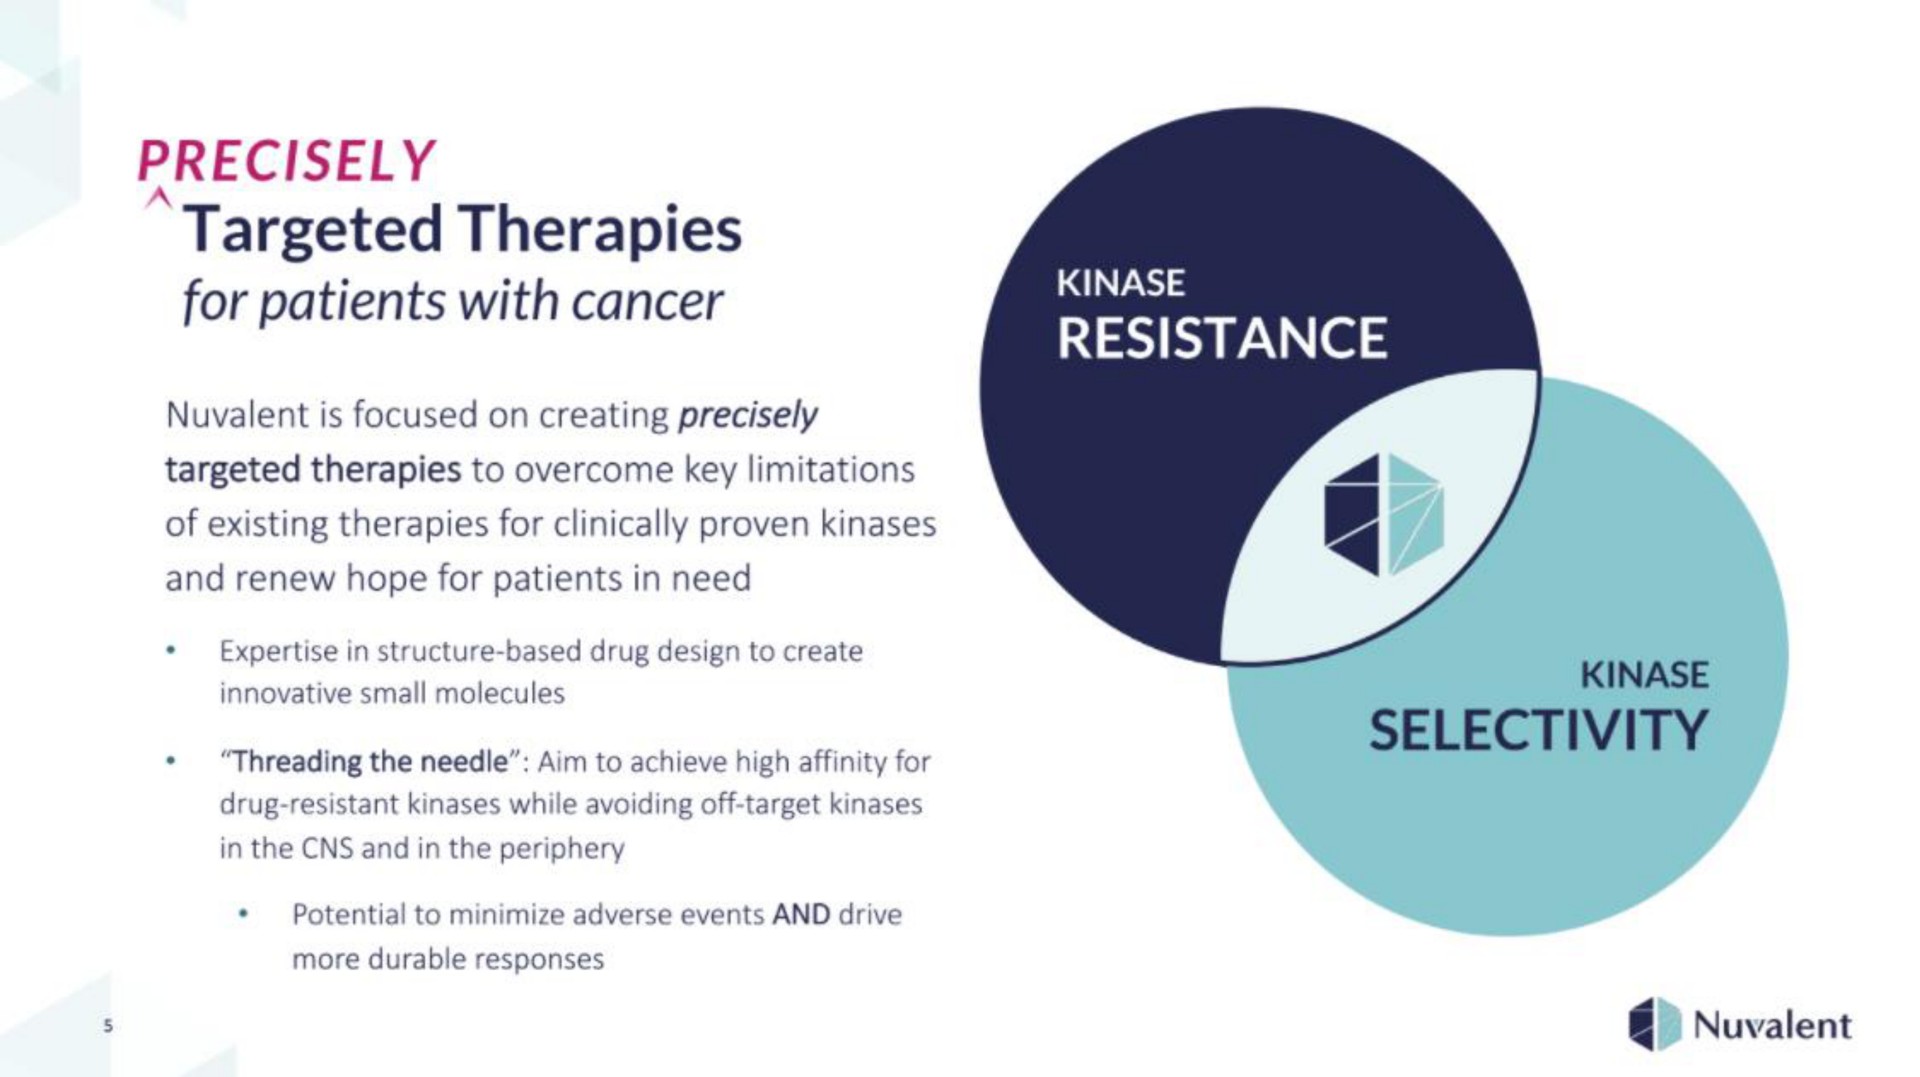 precisely targeted therapies for patients with cancer resistance kinase selectivity | Nuvalent